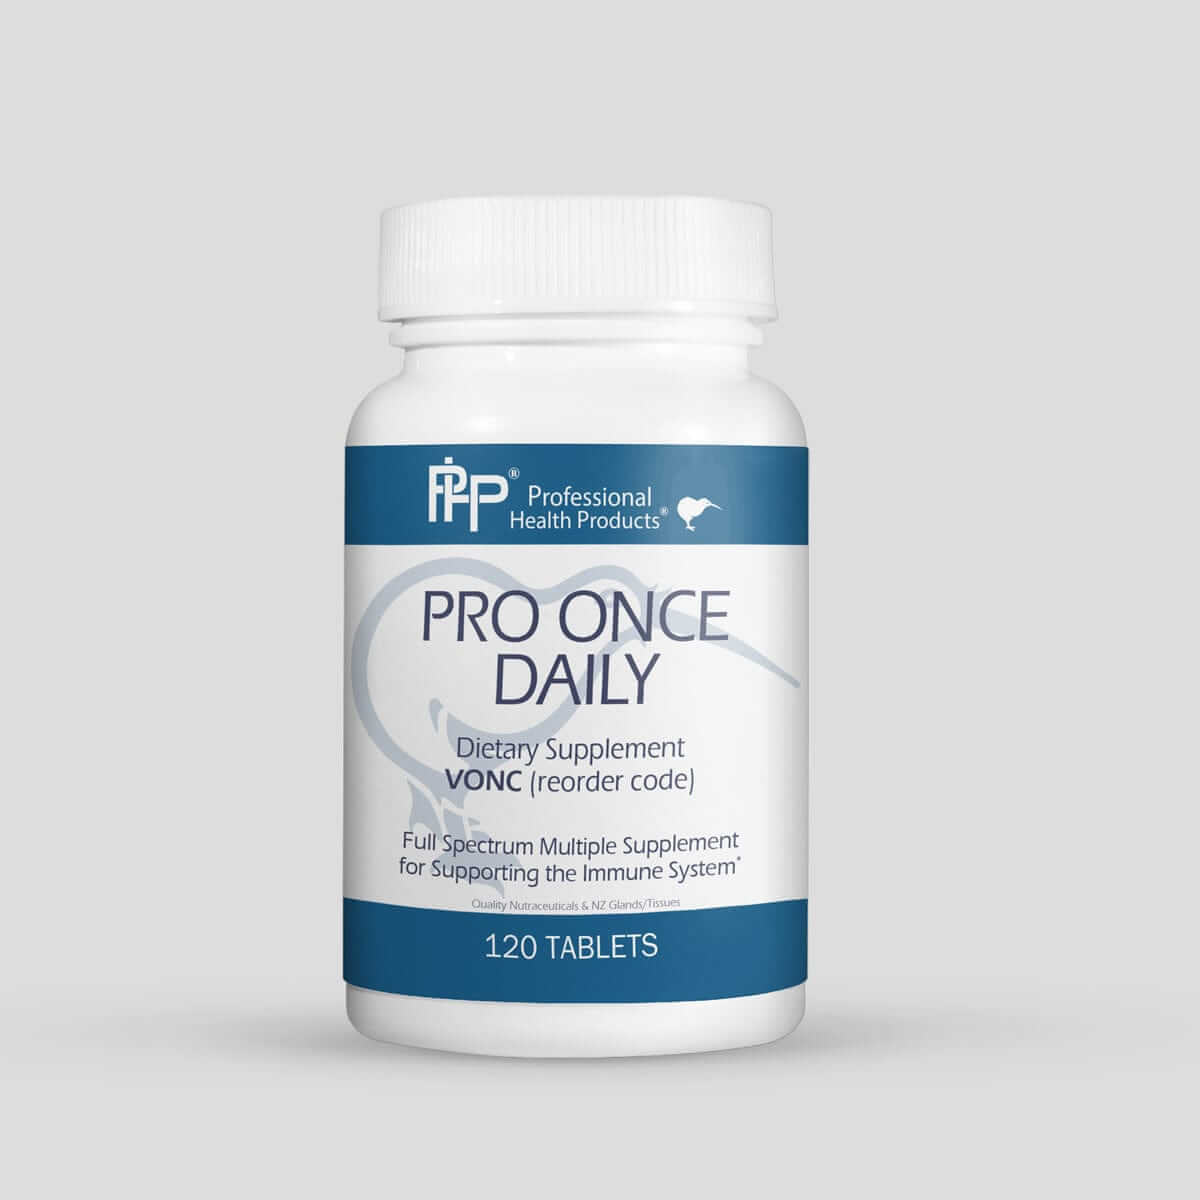 Pro Once Daily * Prof Health Products Supplement - Conners Clinic